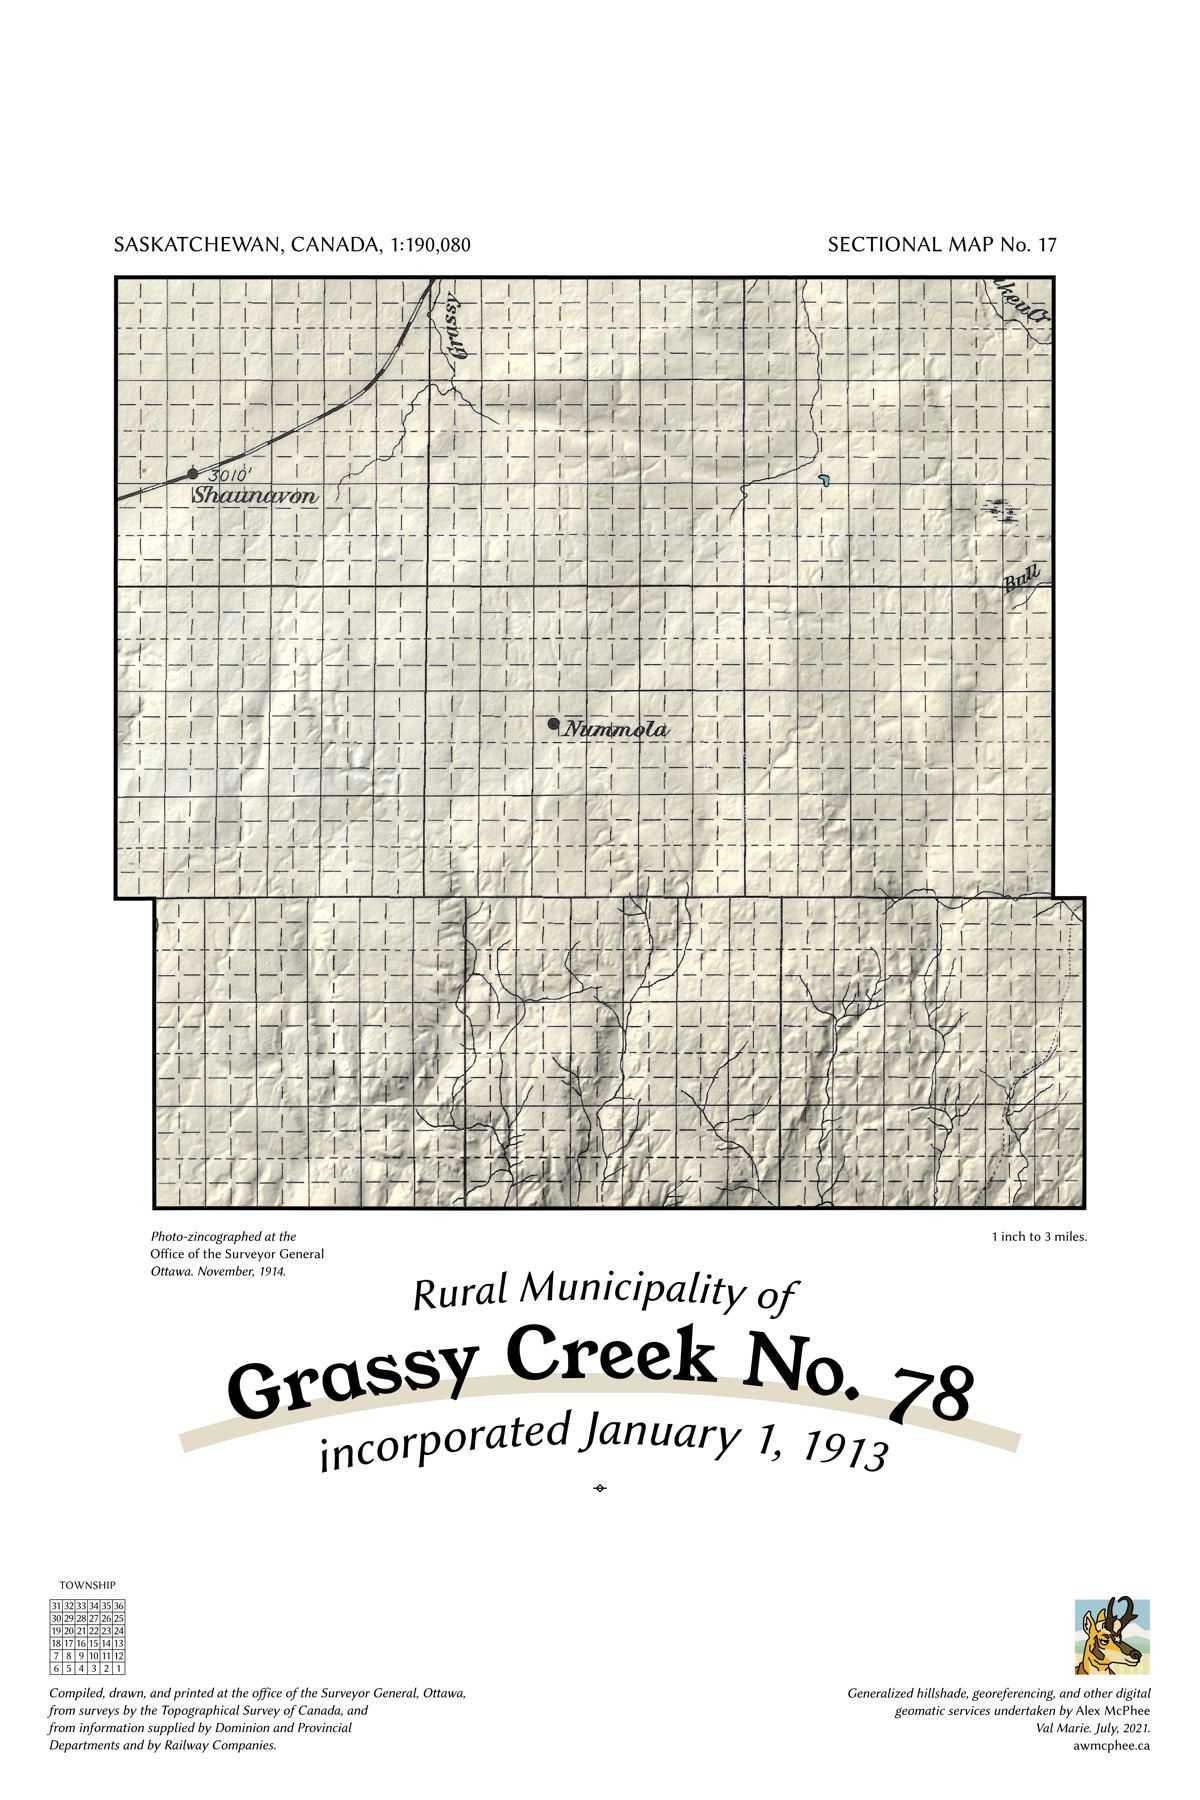 A map of the Rural Municipality of Grassy Creek No. 78.